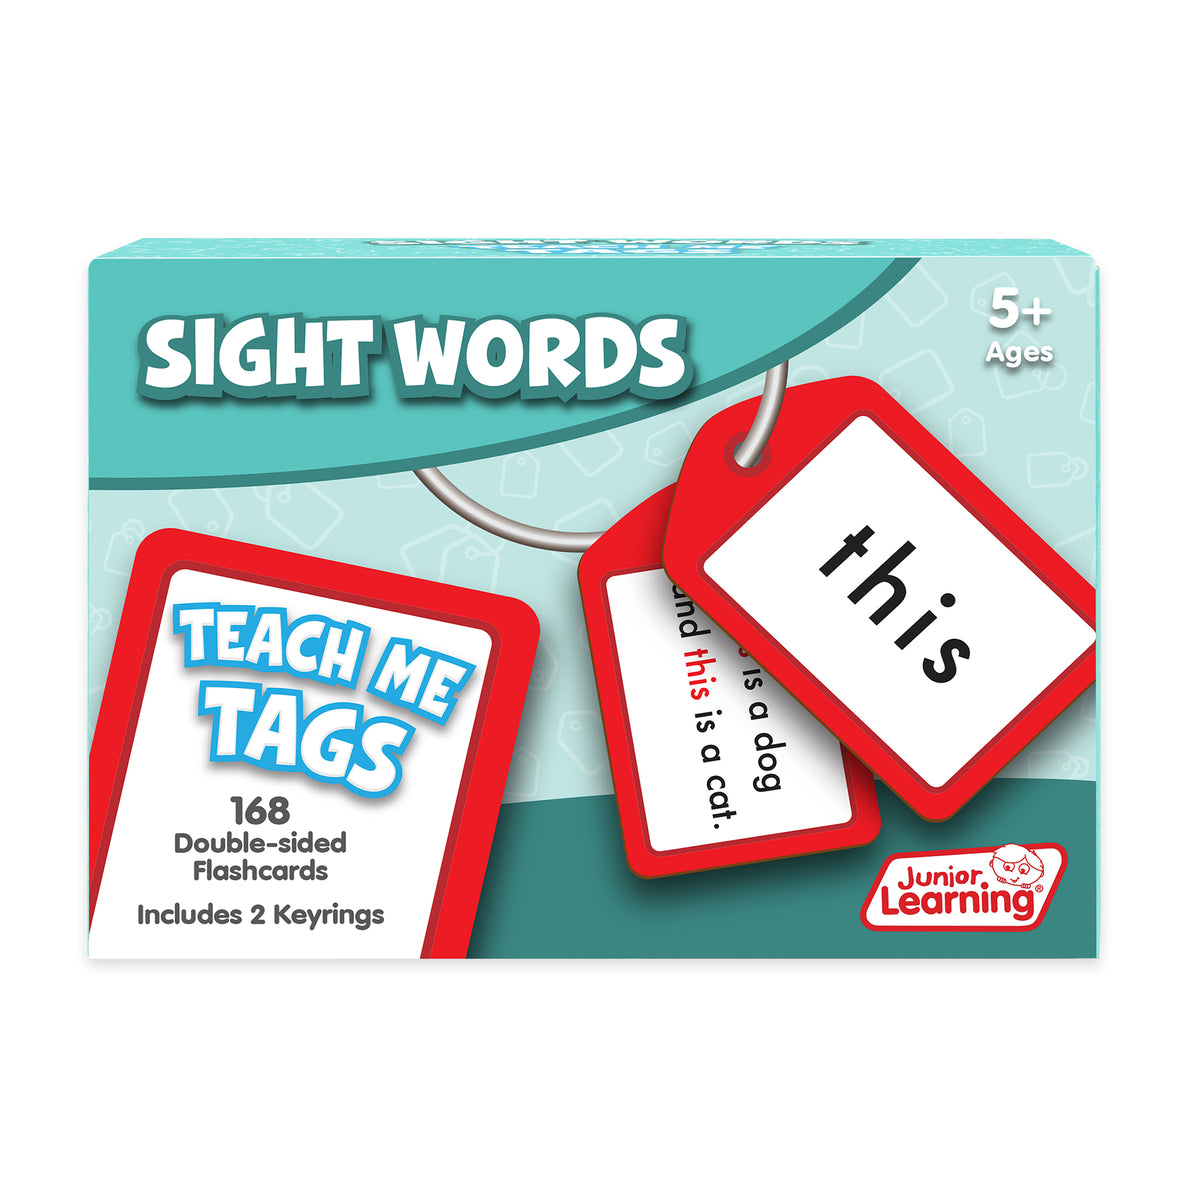 Junior Learning JL629 Sight Words Teach Me Tags box faced front